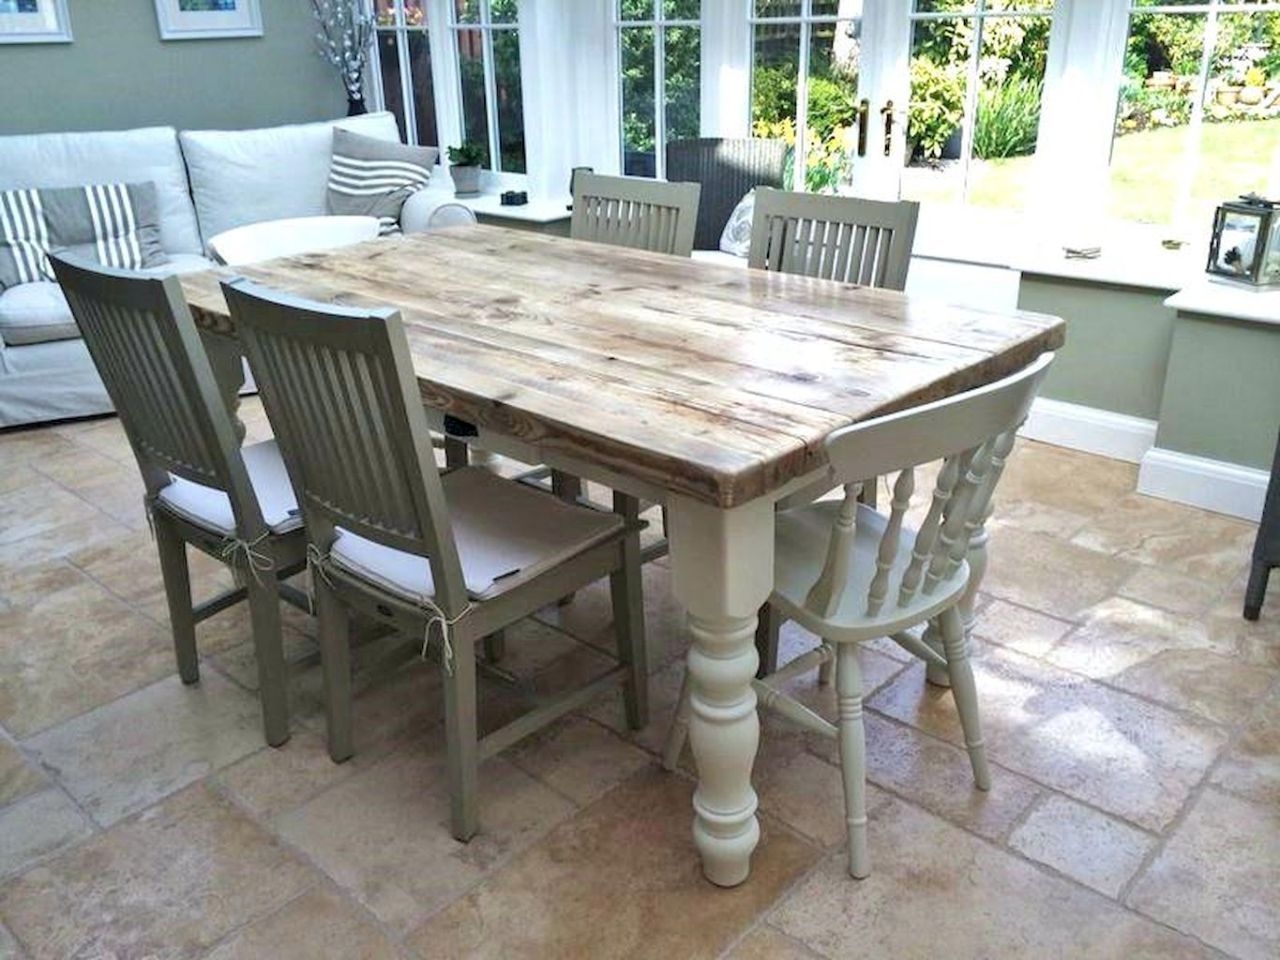 Shabby Chic Dining Table Visualhunt, Weathered Dining Room Sets